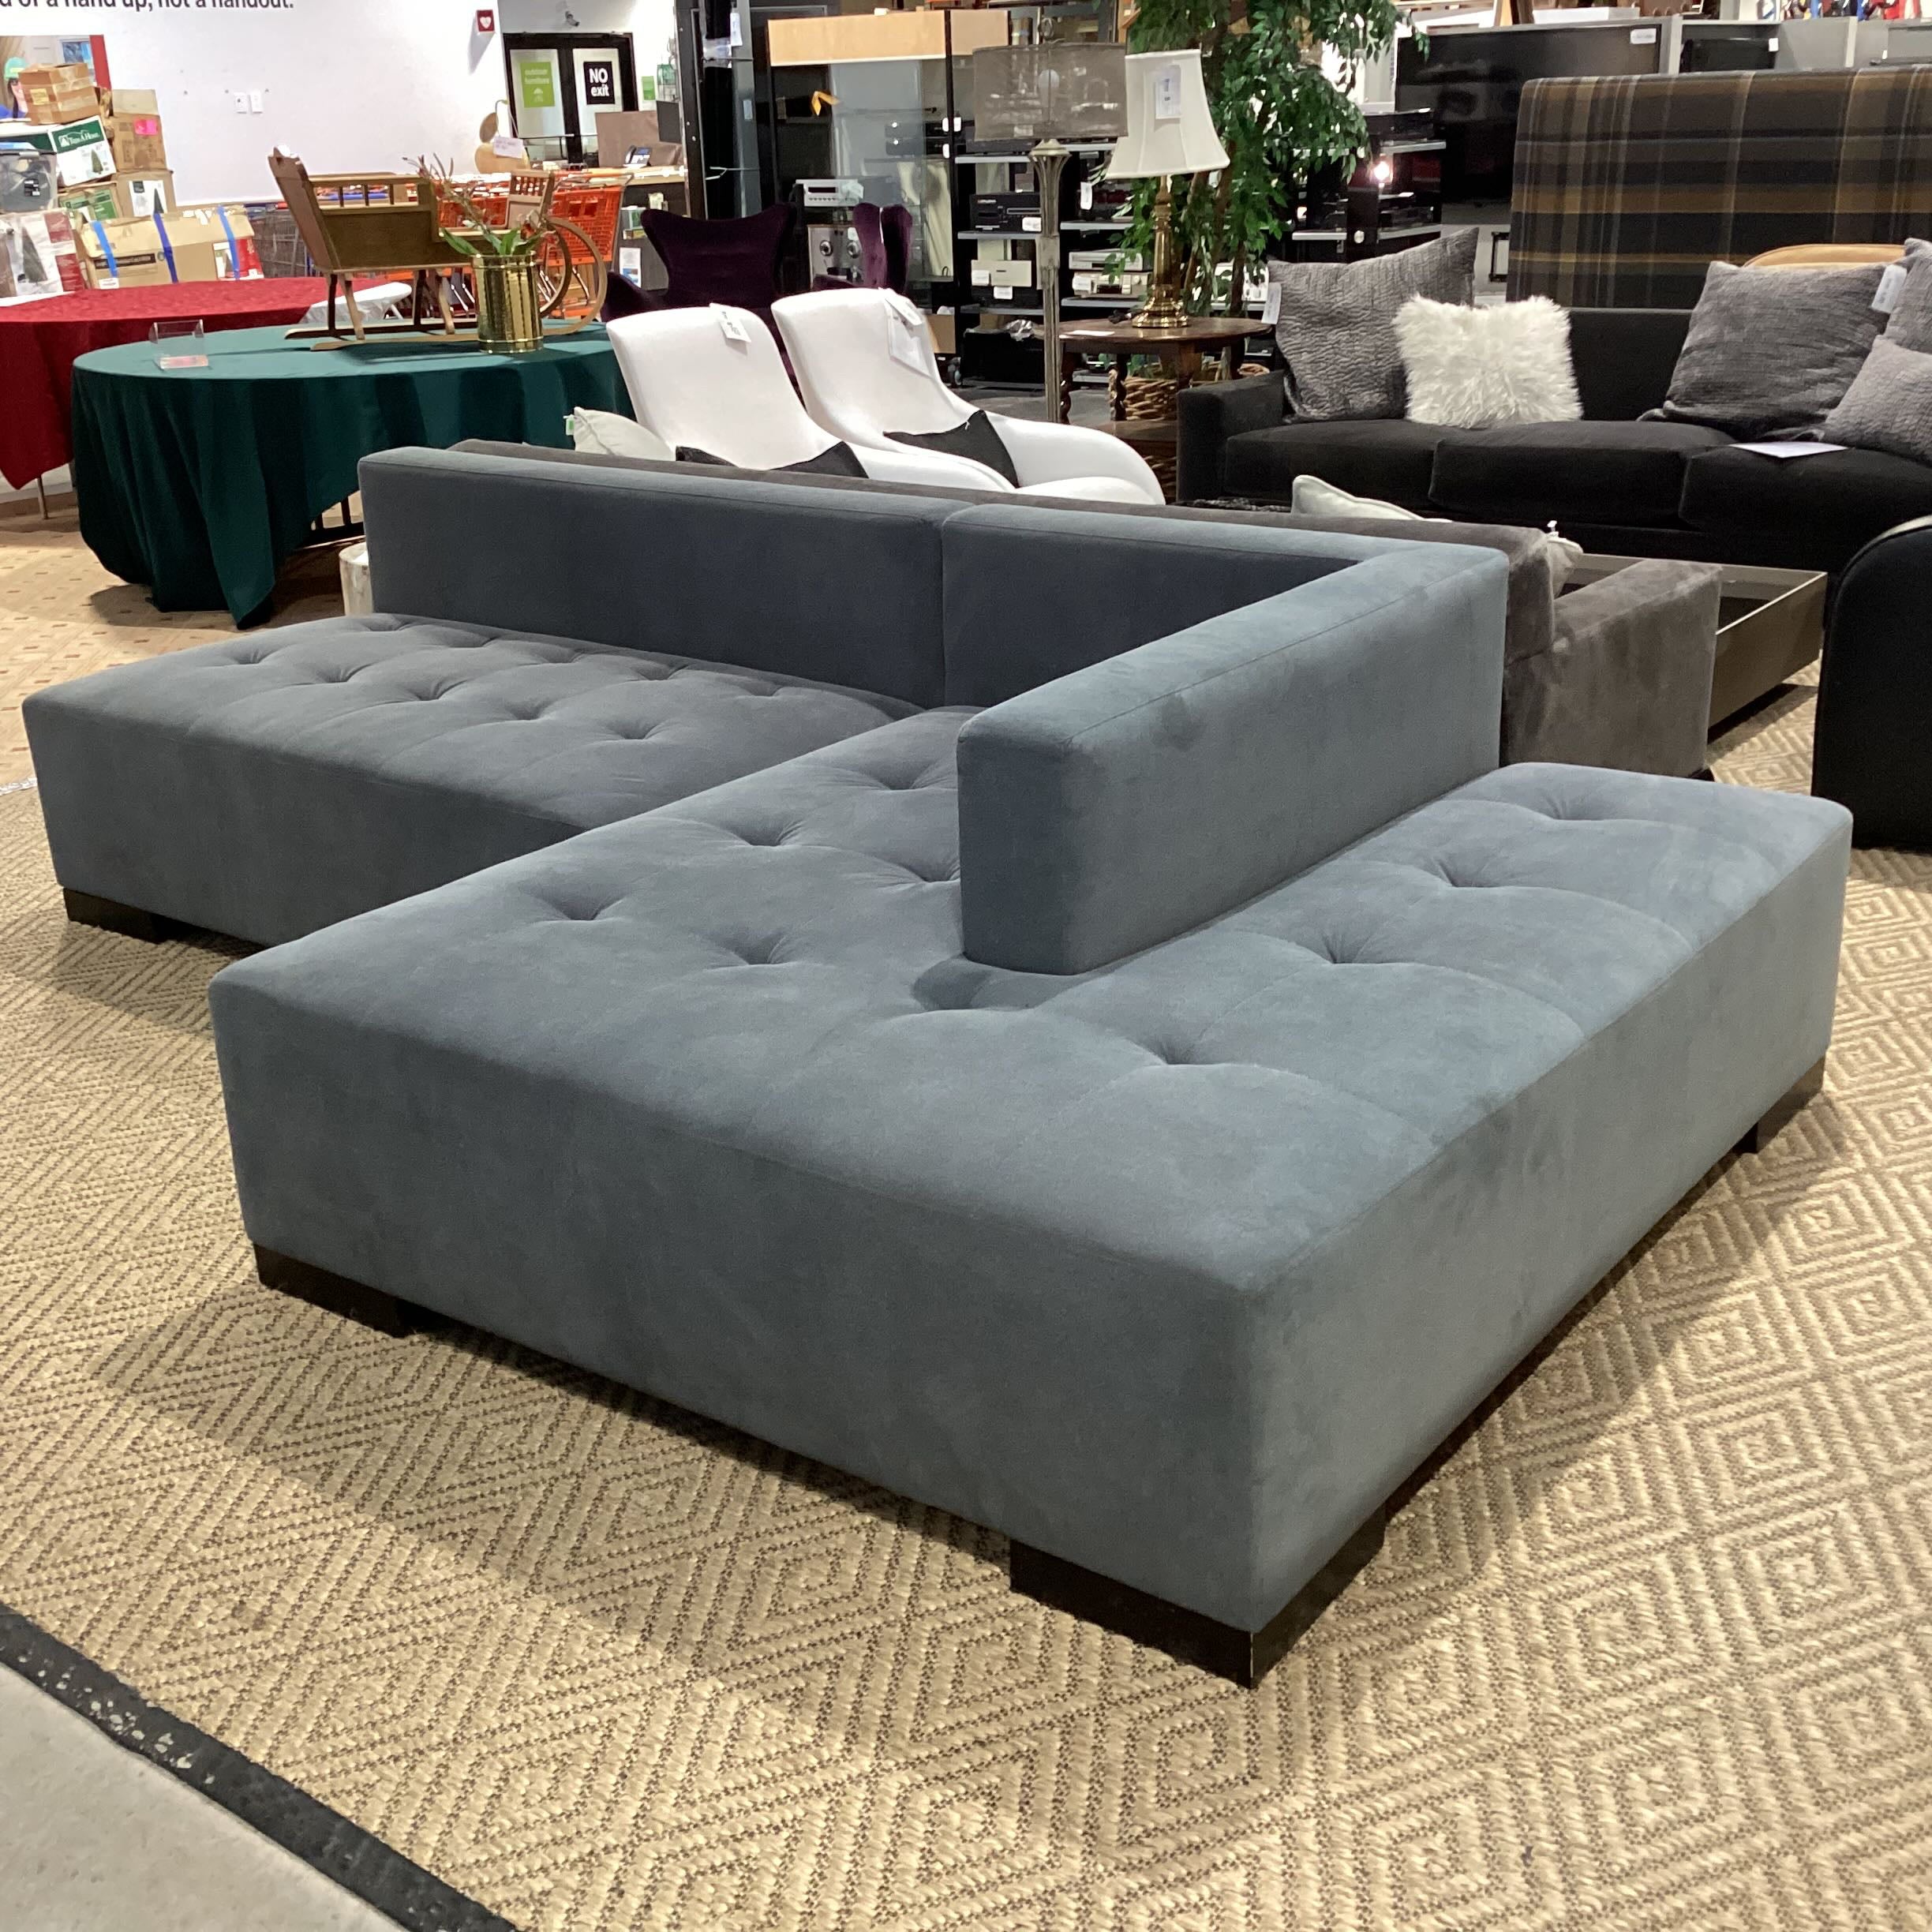 American Leather Corbin Grey Tufted Modern 2 Piece Sectional